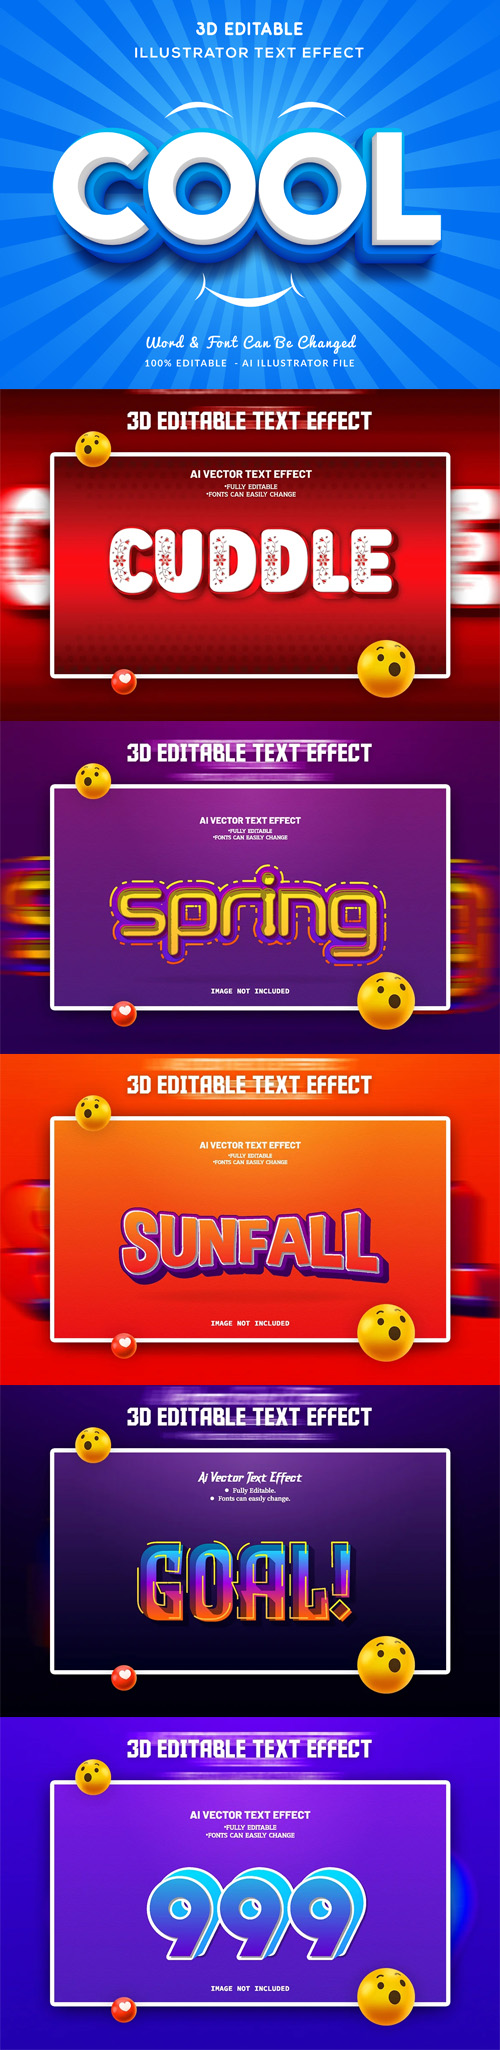 Cool Pack - 3D Editable Text Effects for Illustrator